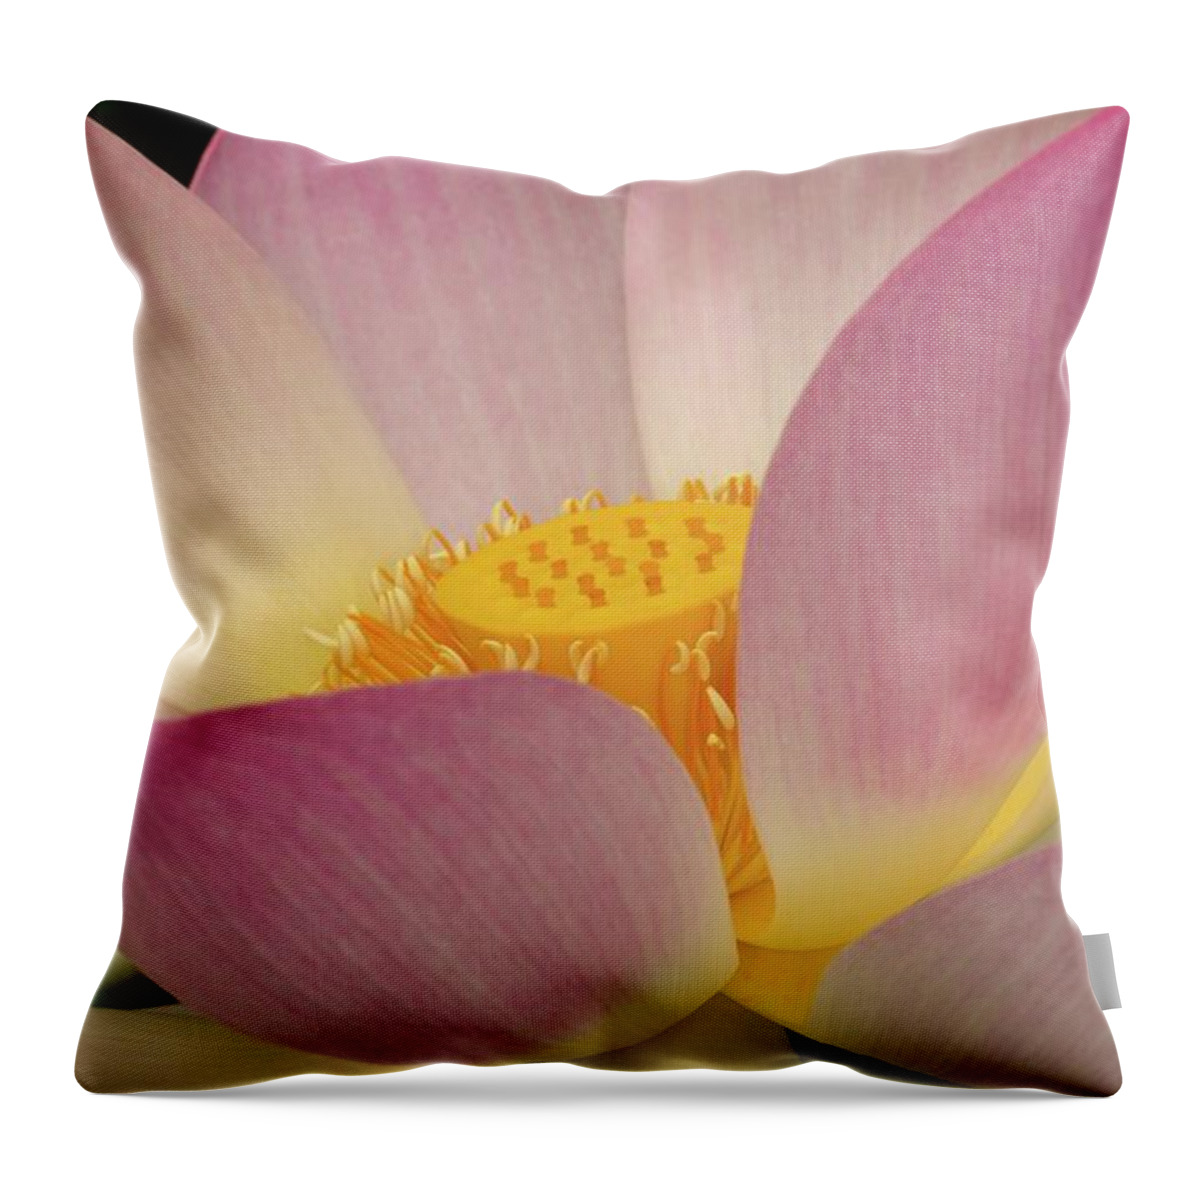 Flowering Throw Pillow featuring the photograph Japanese Lotus in Full Bloom by Liza Eckardt